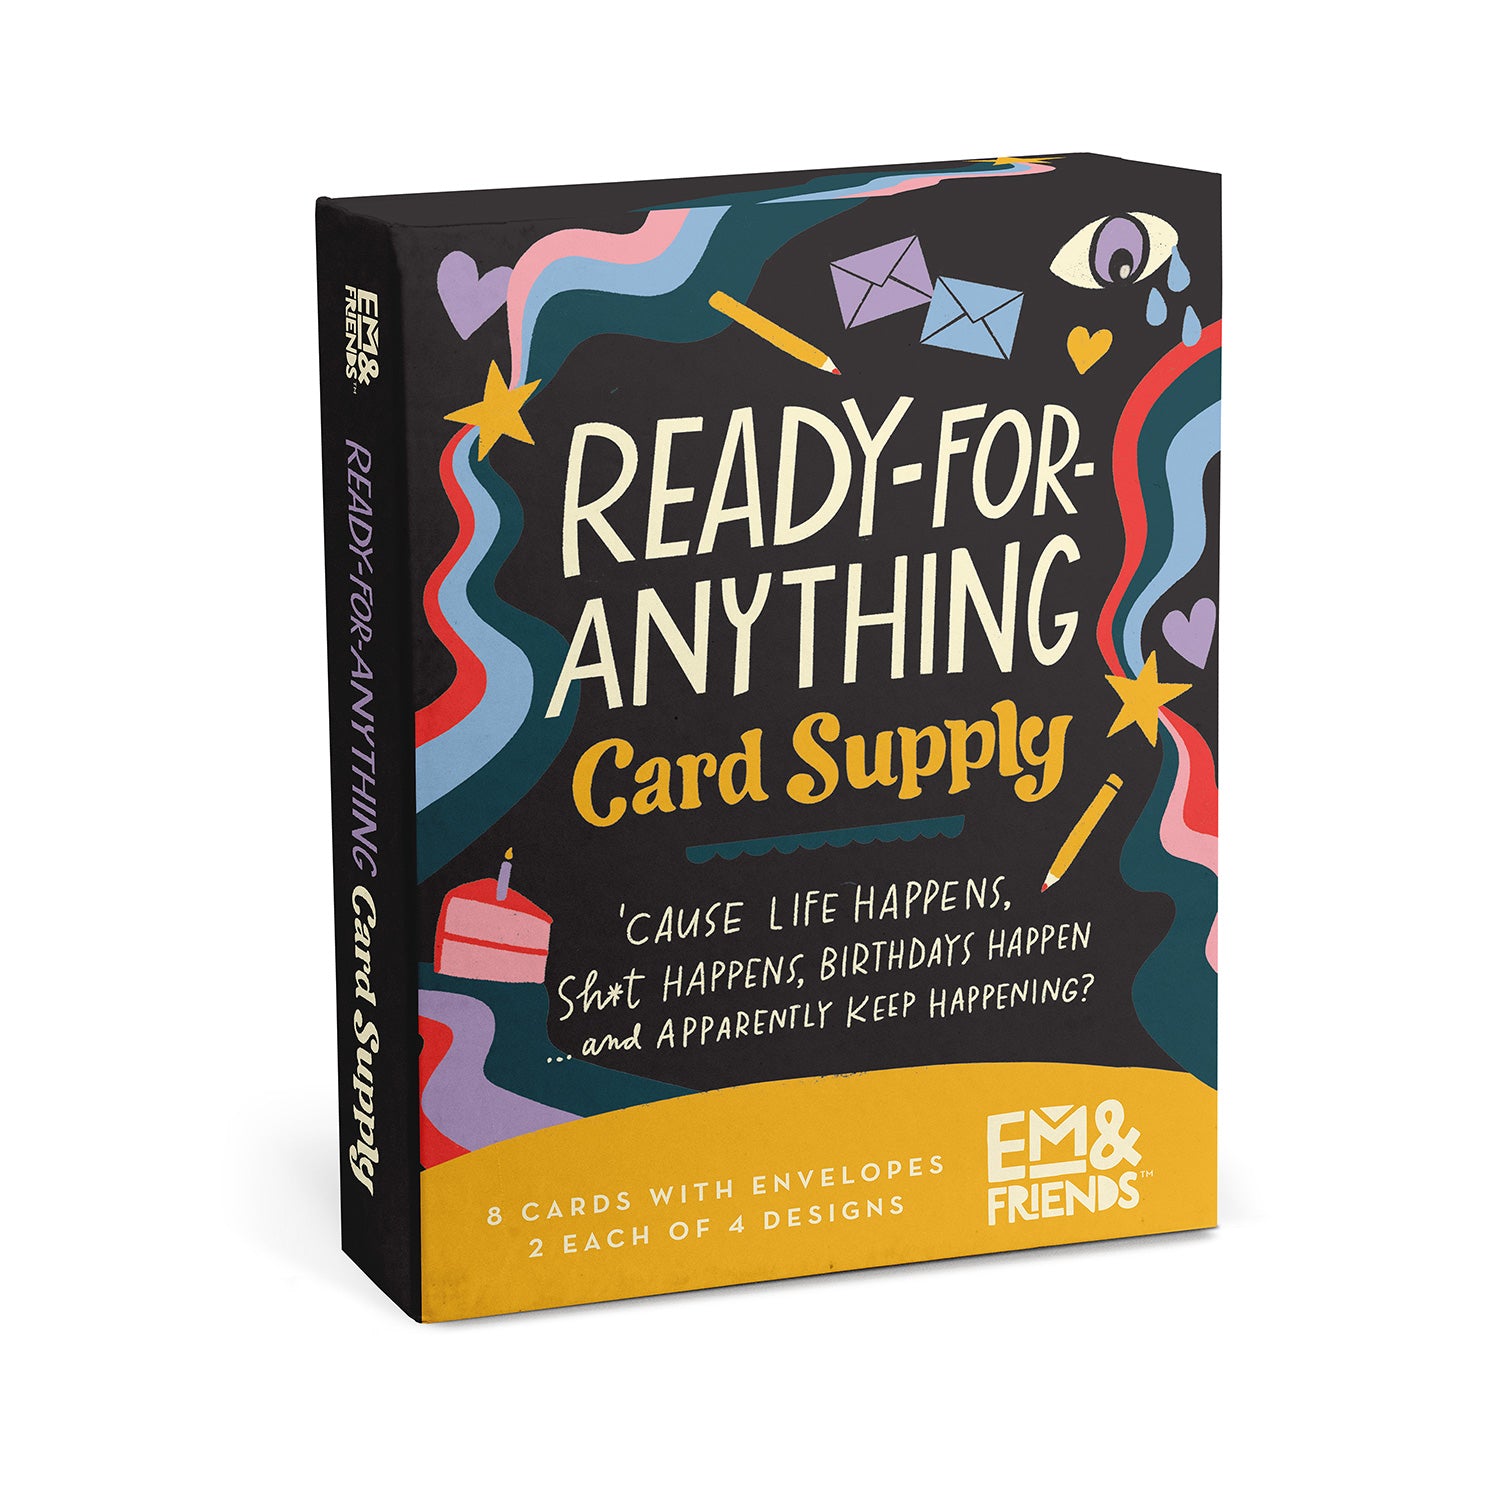 Ready For Anything Boxed Cards, 8 Assorted Year-Round Cards